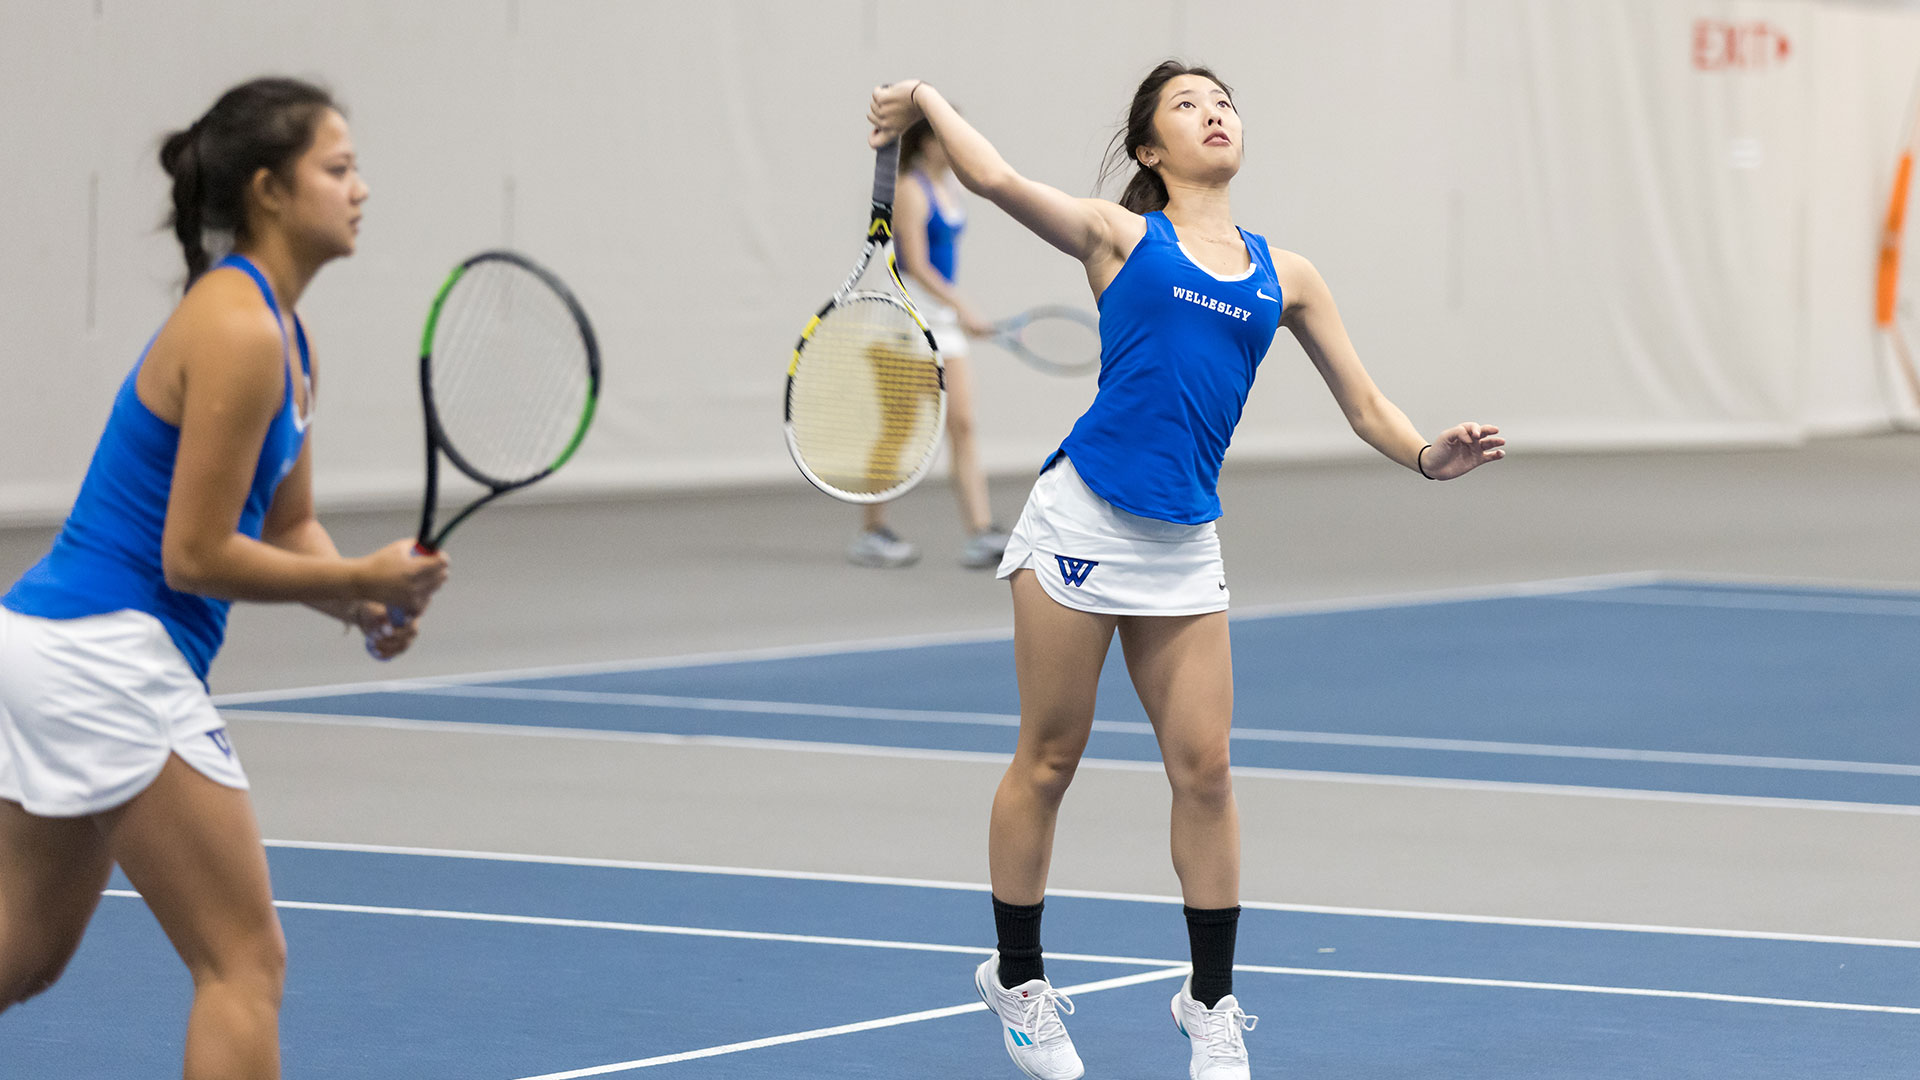 Blue Tennis Concludes Play at Wellesley Invitational